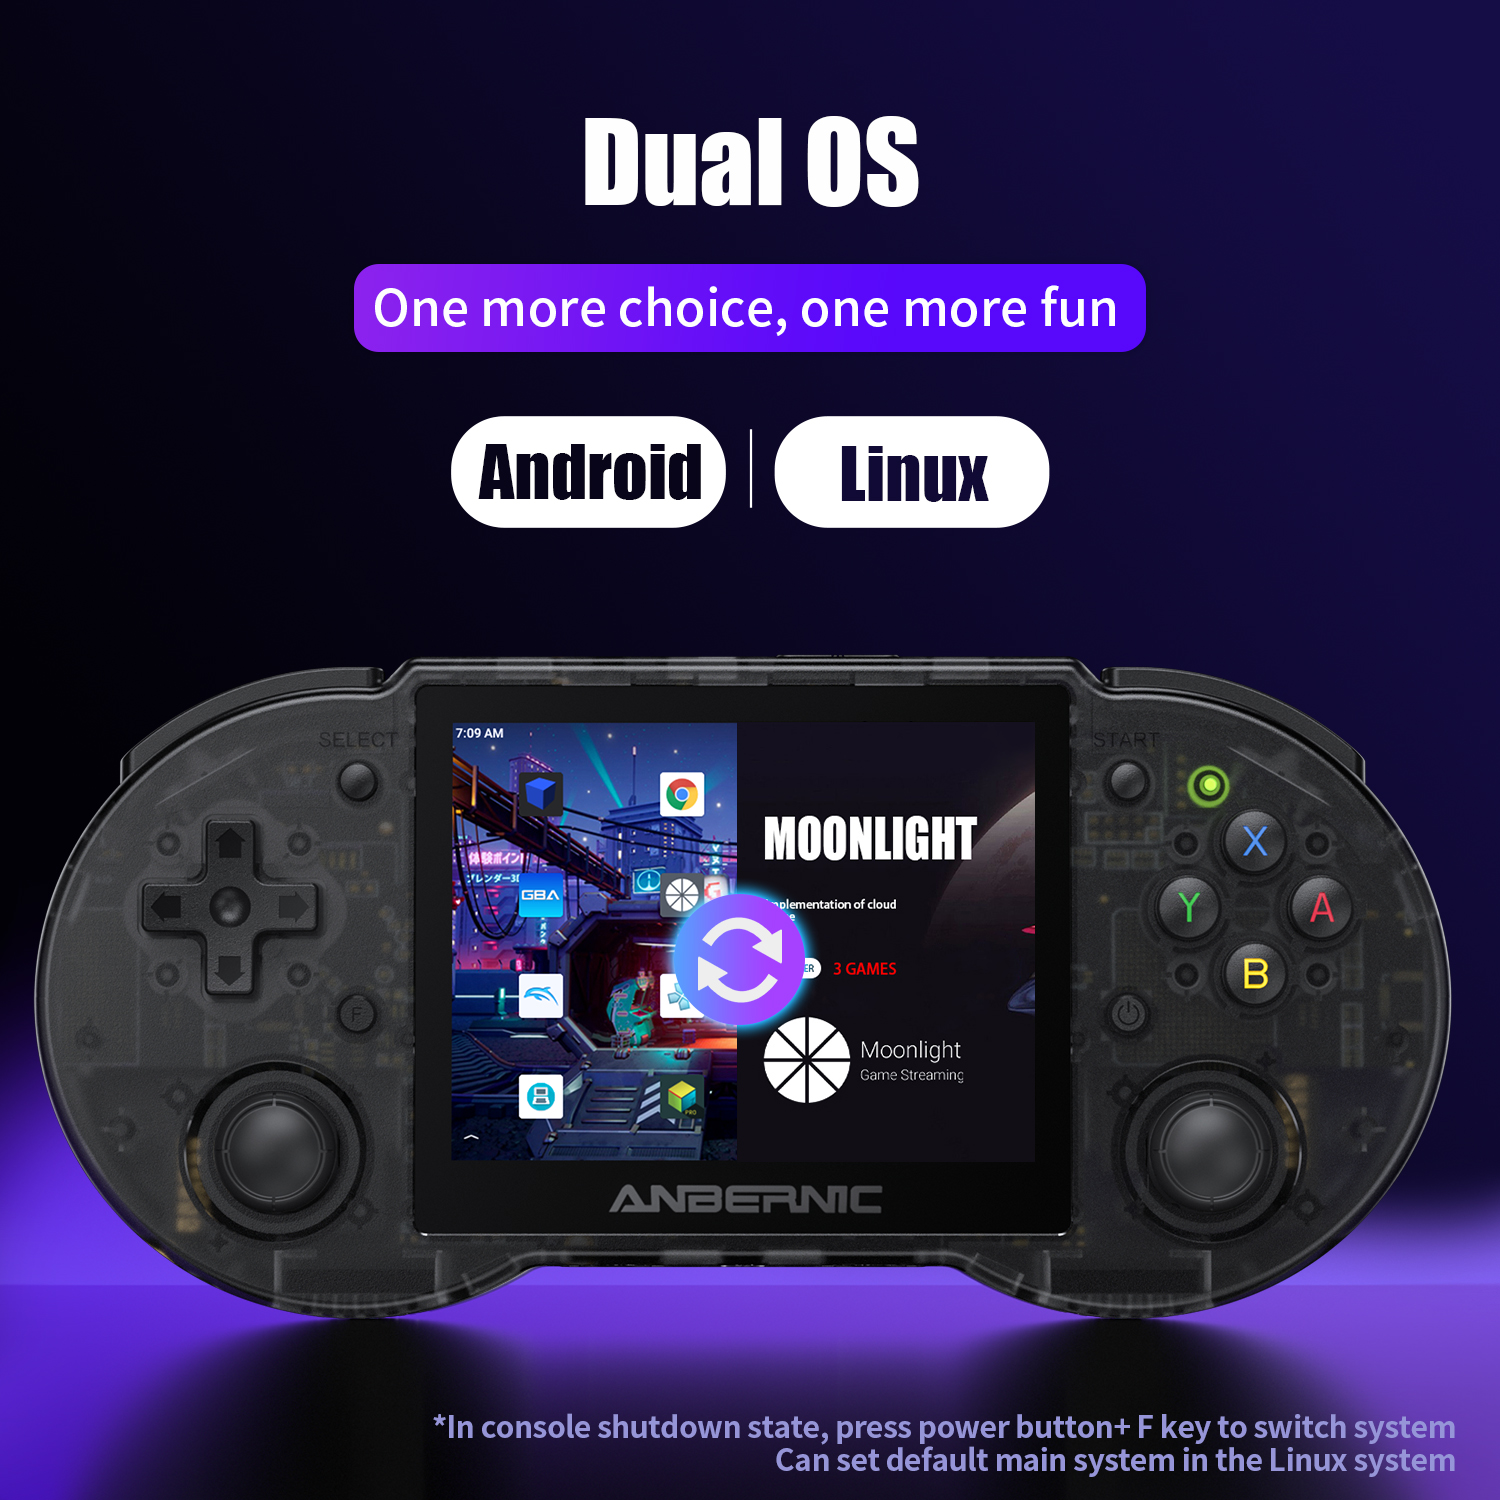 ANBERNIC RG353P 80GB 15000 Games Video Handheld Game Console Android 11 Linux Dual System 5G WiFi Bluetooth 4.2 DC SS PS1 NDS N64 Retro Game Player 3.5 inch IPS Full View Display HDMI Output